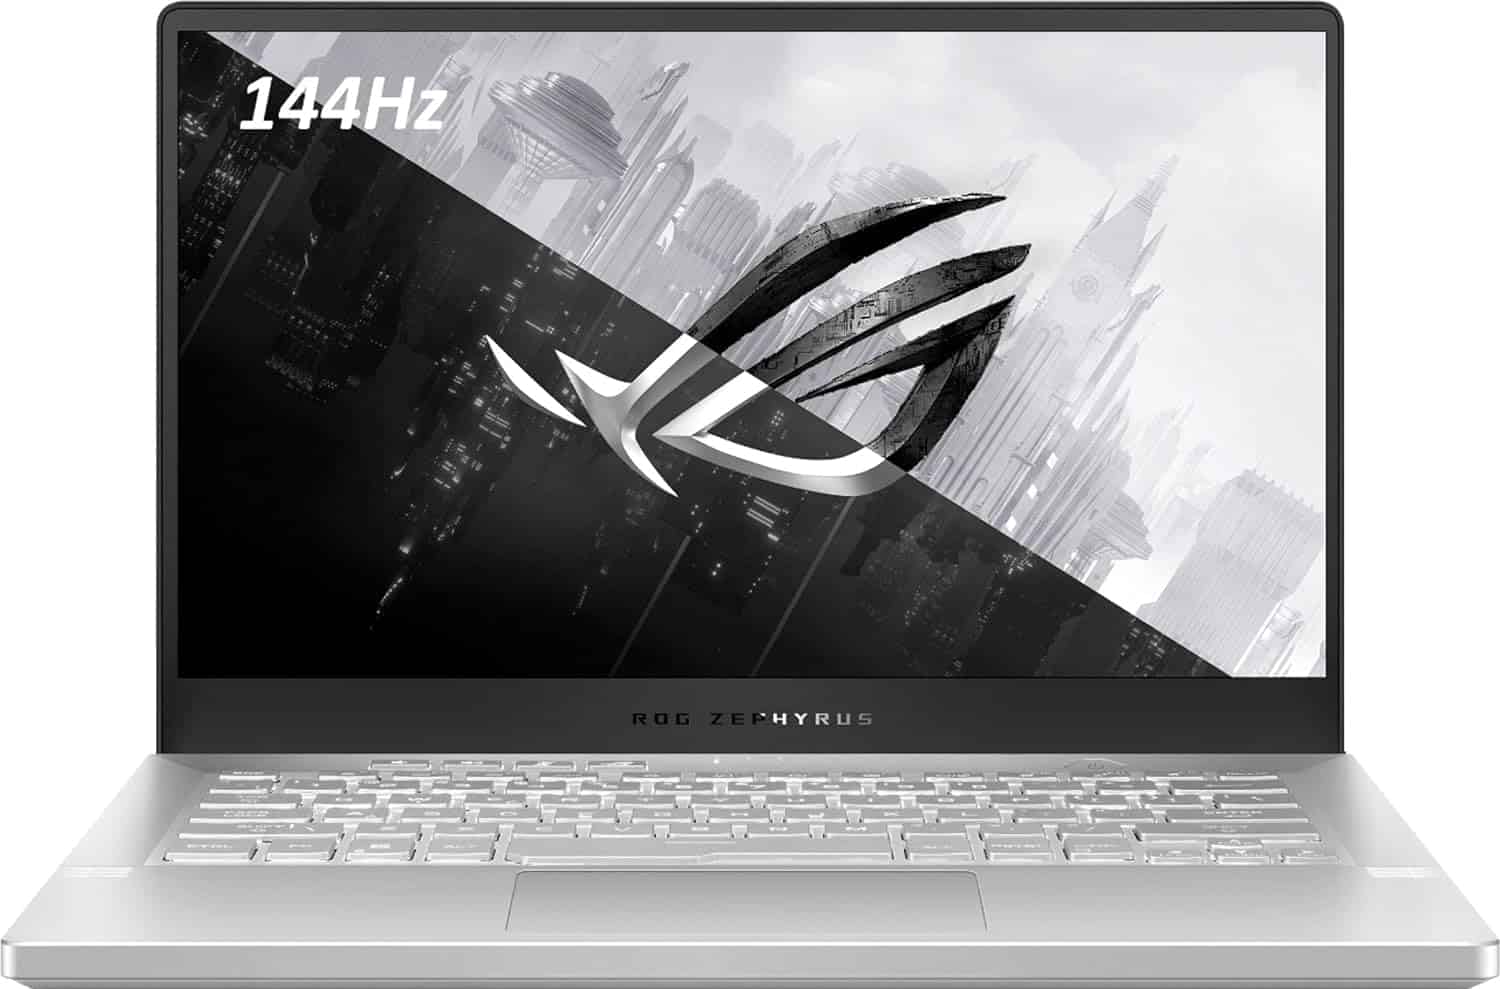 The asus rog laptop is open on a white background.